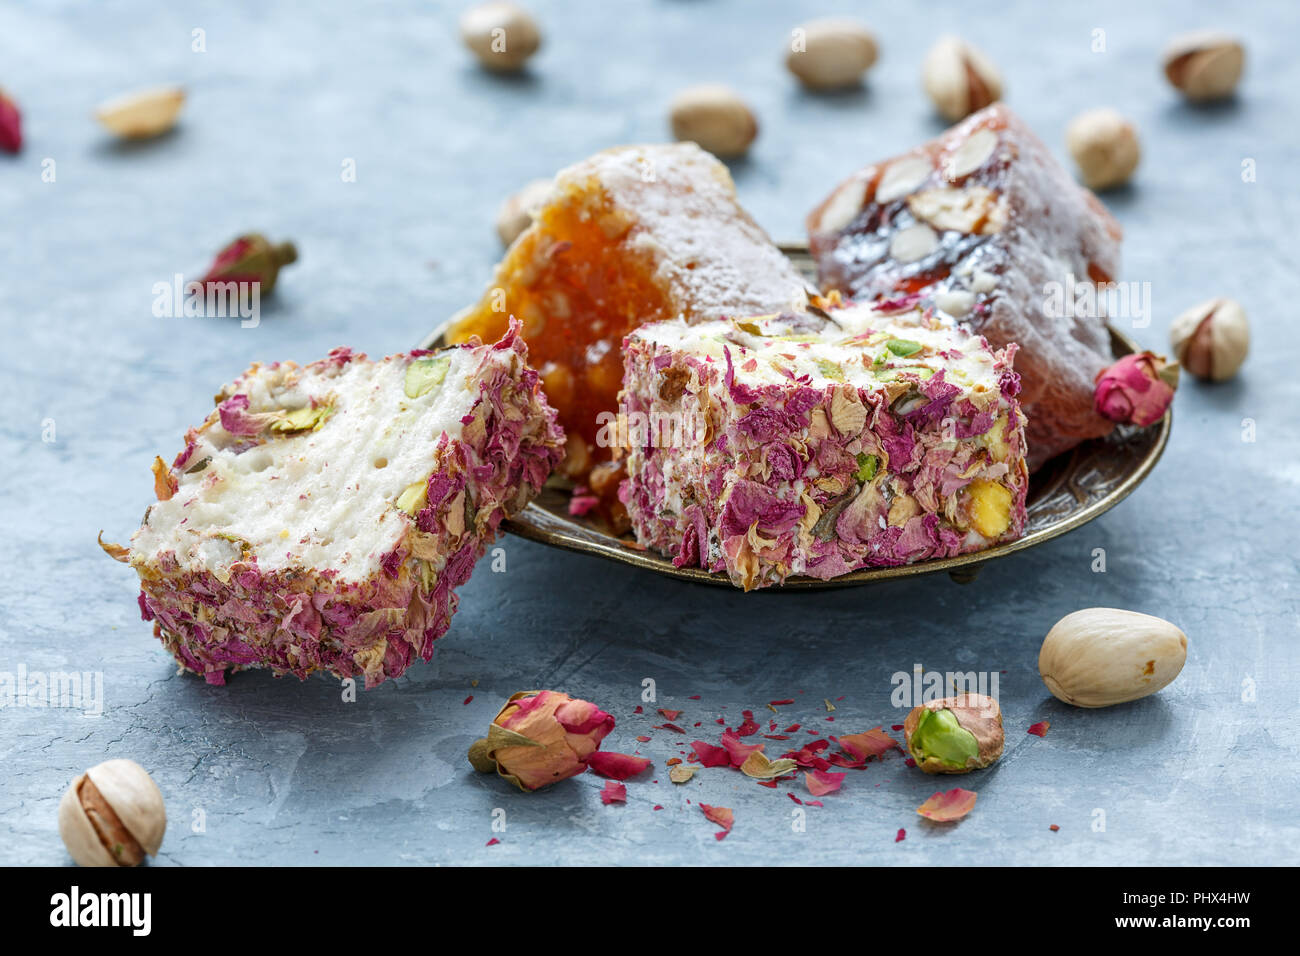 Turkish delight with pink petals and nuts. Stock Photo